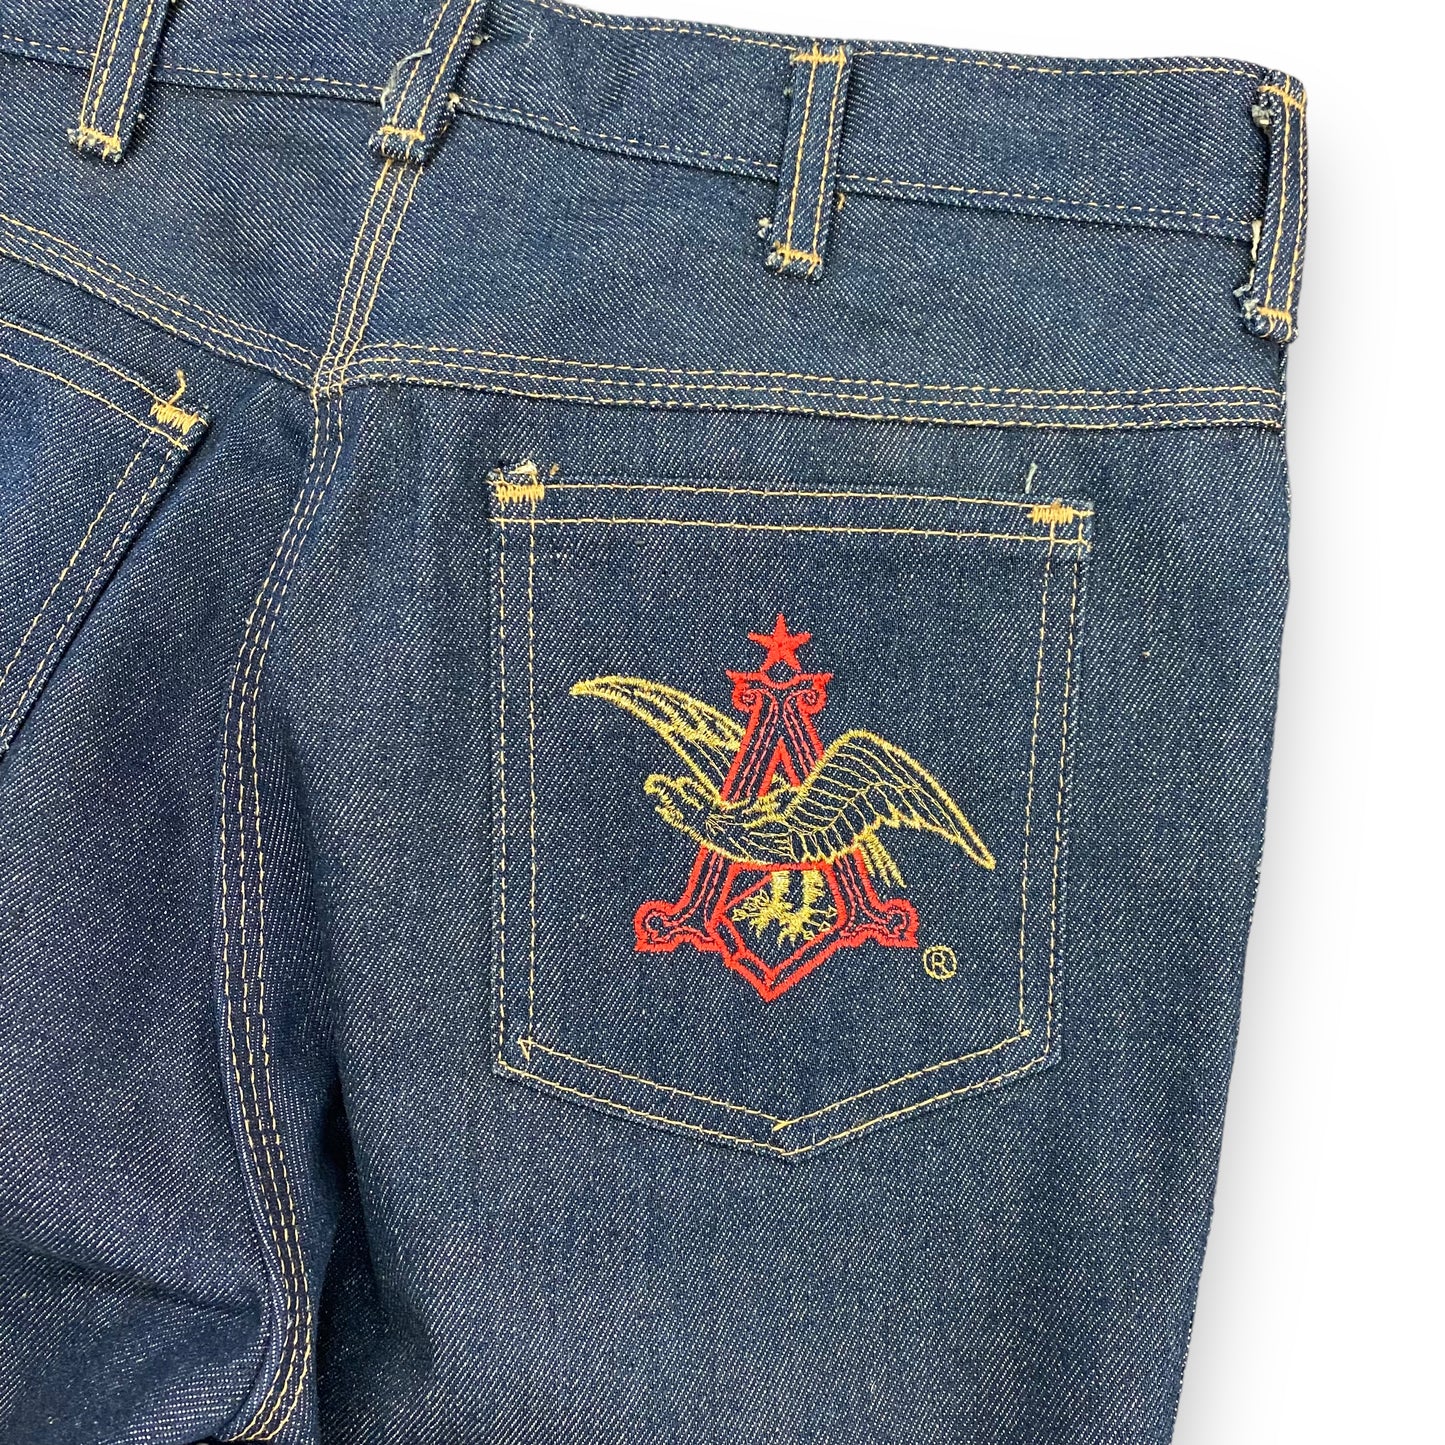 Vintage 1980s Anheuser Busch Embroidered Boot Cut Jeans - 32"x32"